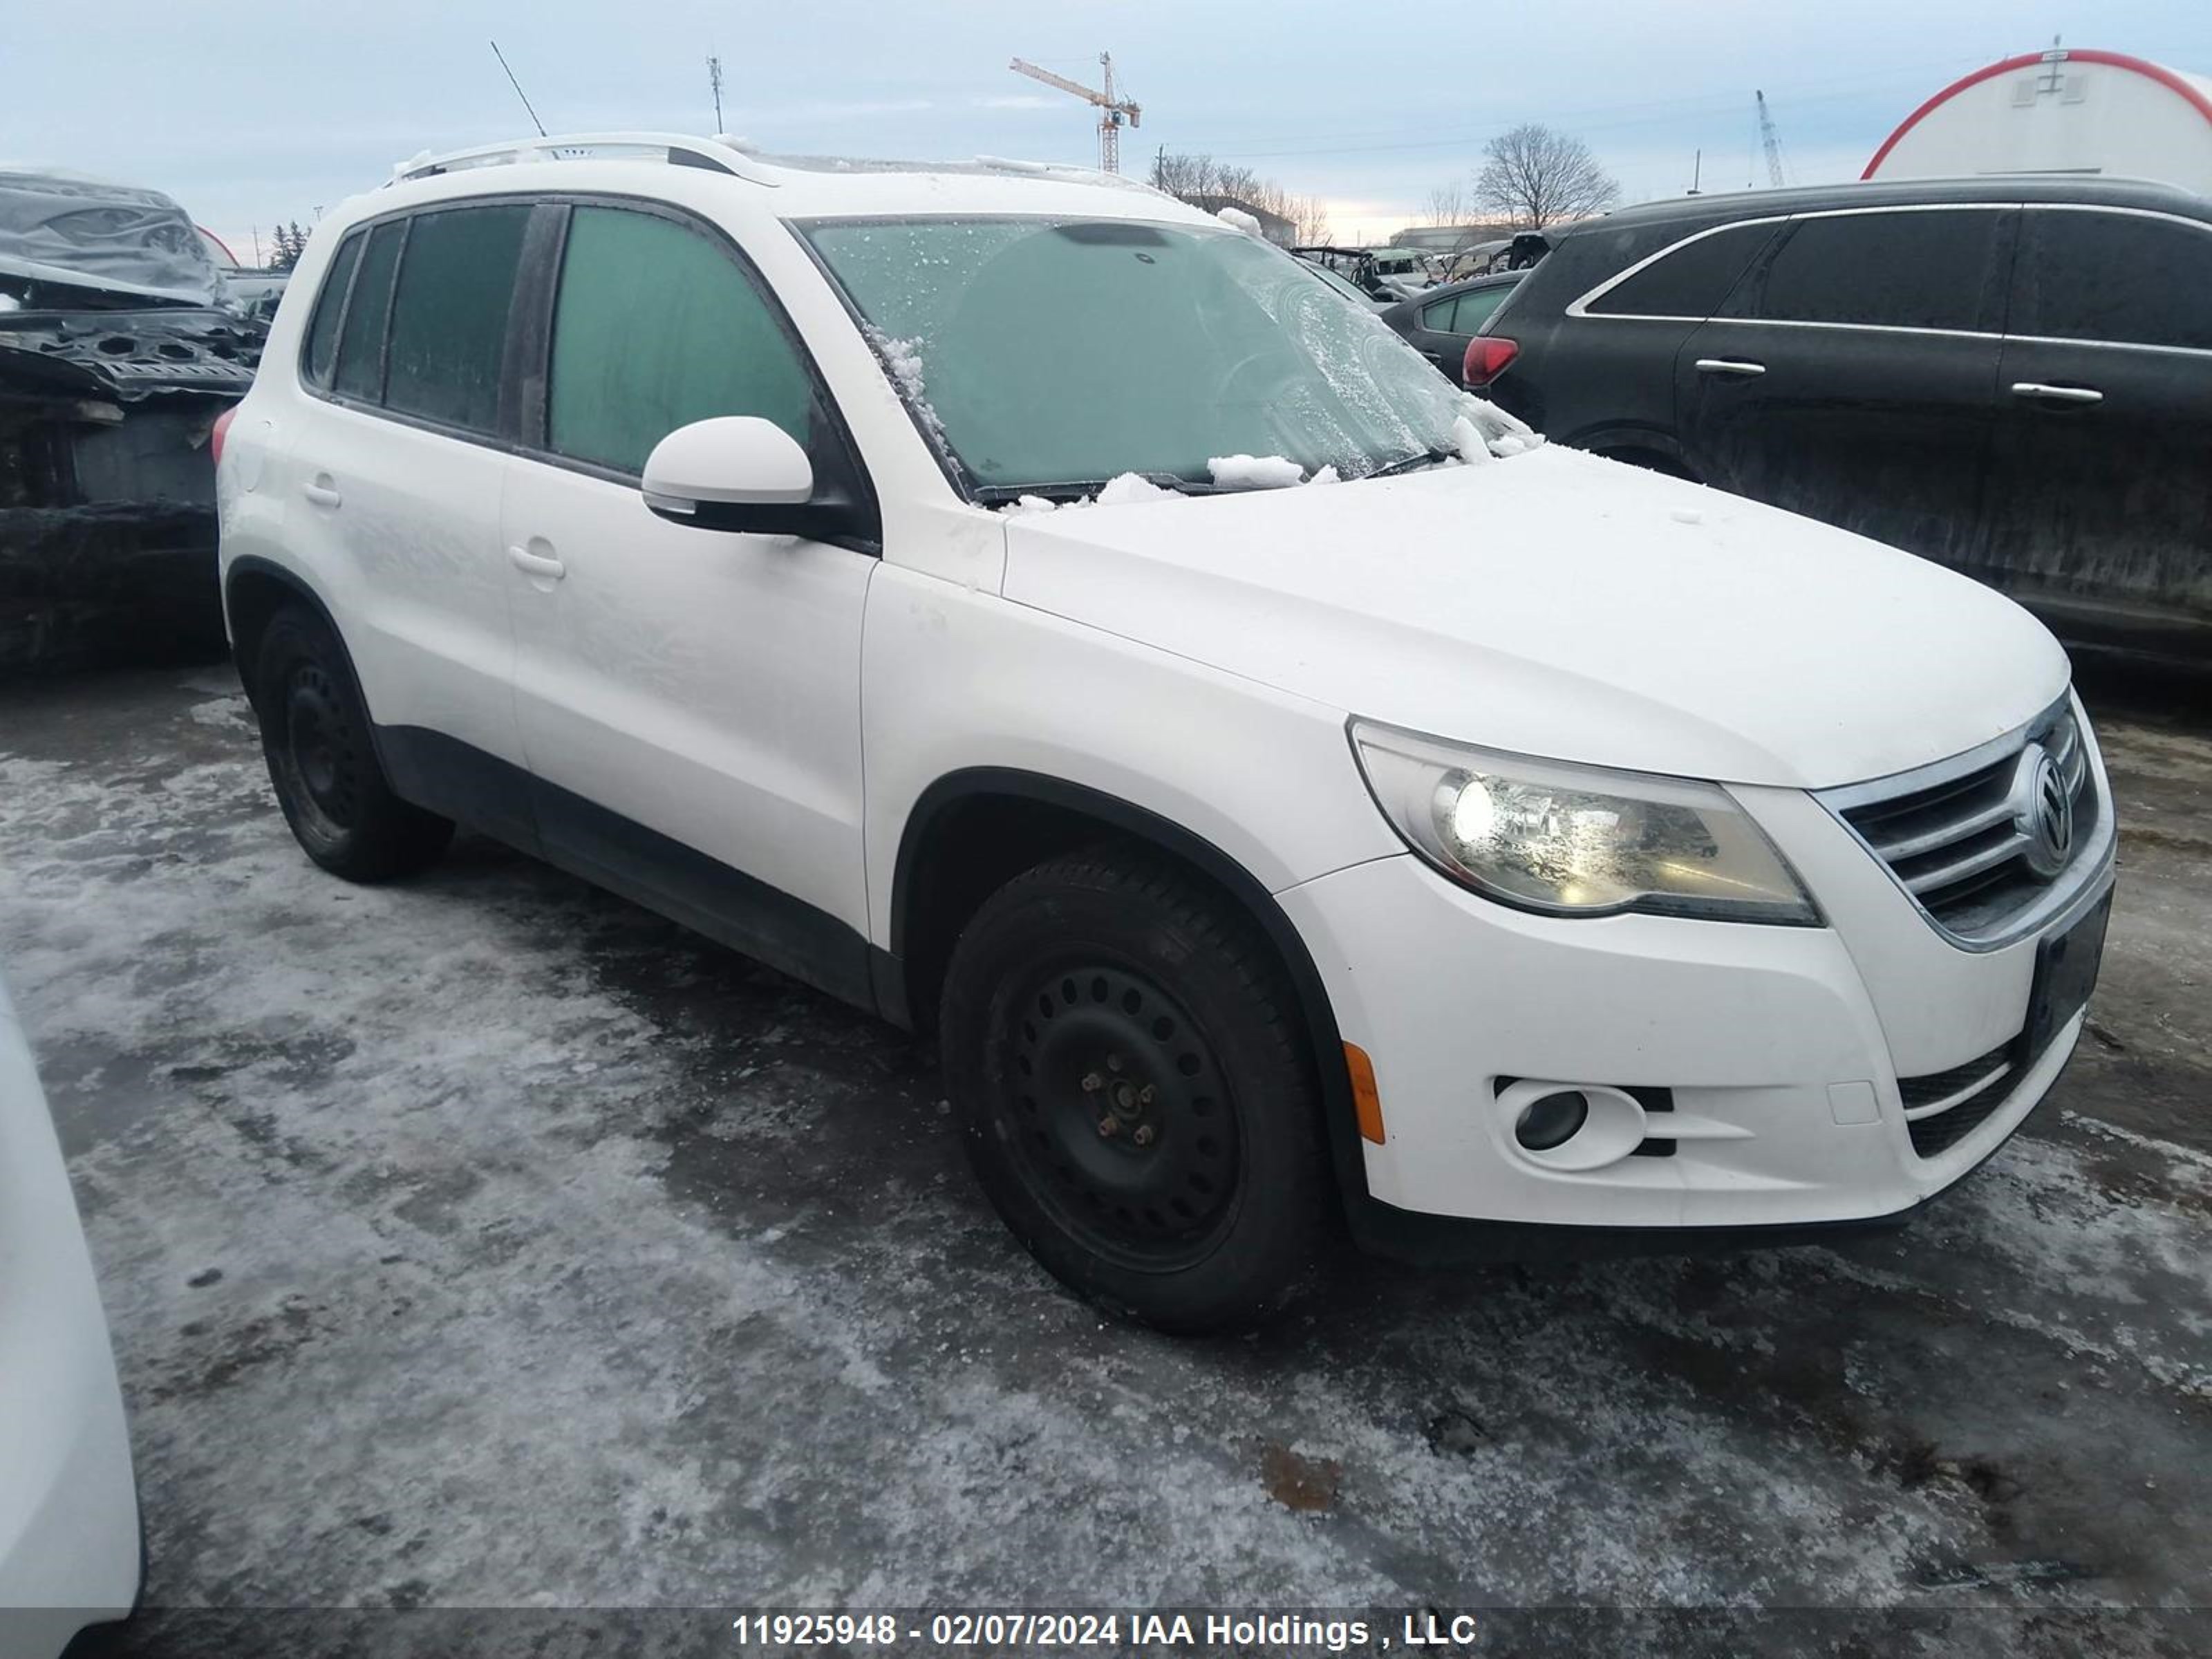 vin: WVGBV7AX9BW509594 WVGBV7AX9BW509594 2011 volkswagen tiguan 2000 for Sale in k0a3h0, 1717 Burton Road , Vars, Ontario, USA